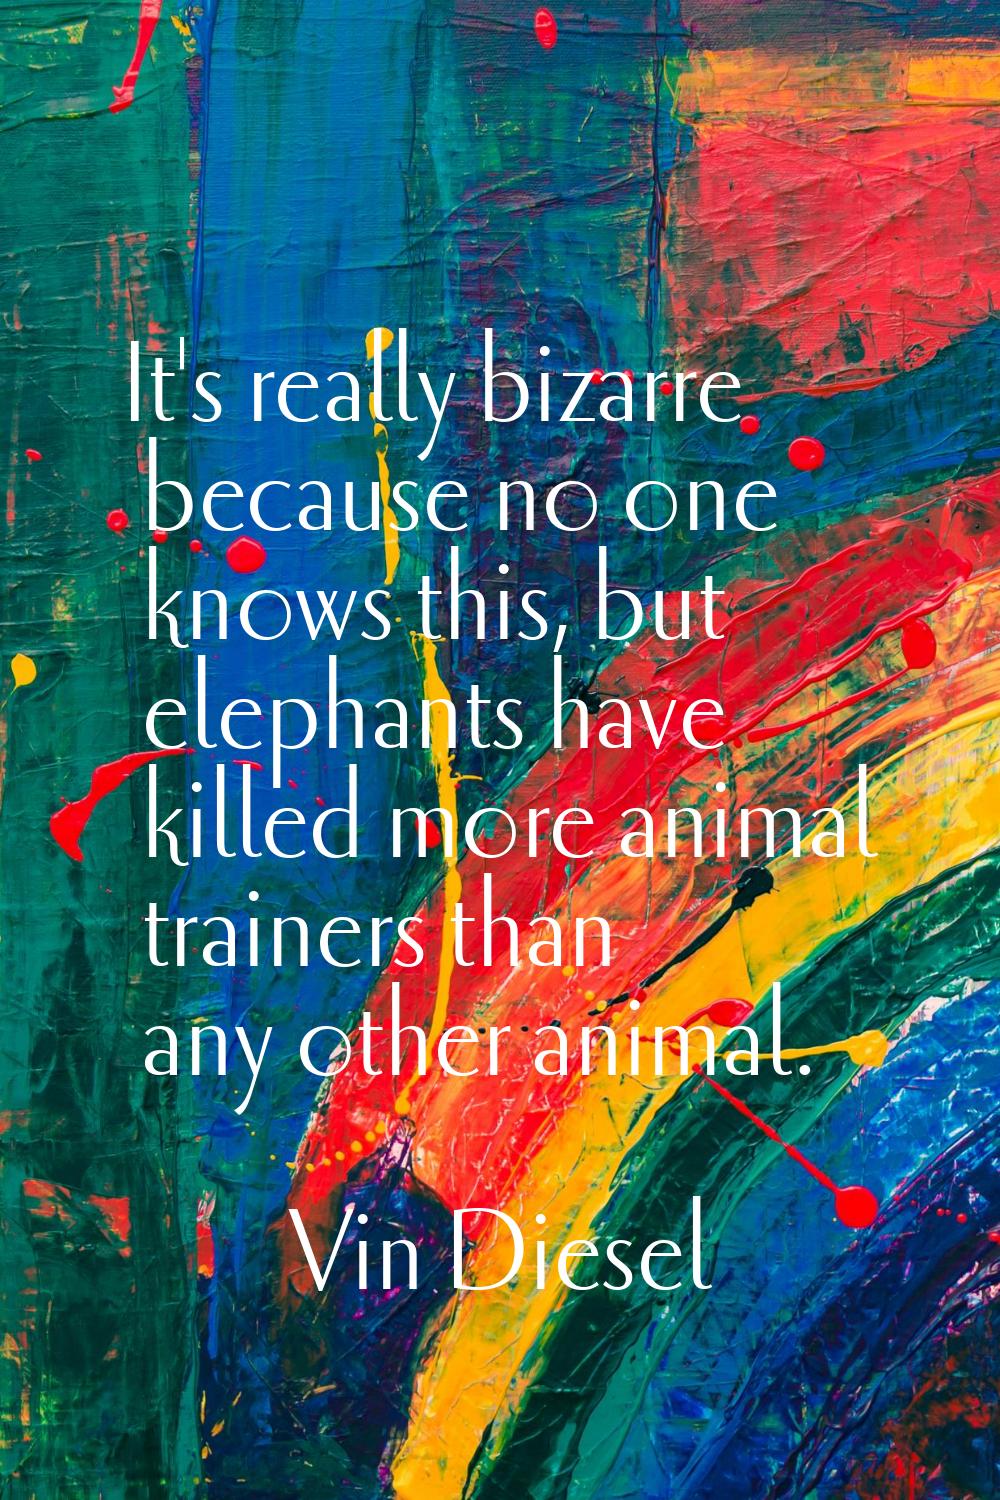 It's really bizarre because no one knows this, but elephants have killed more animal trainers than 